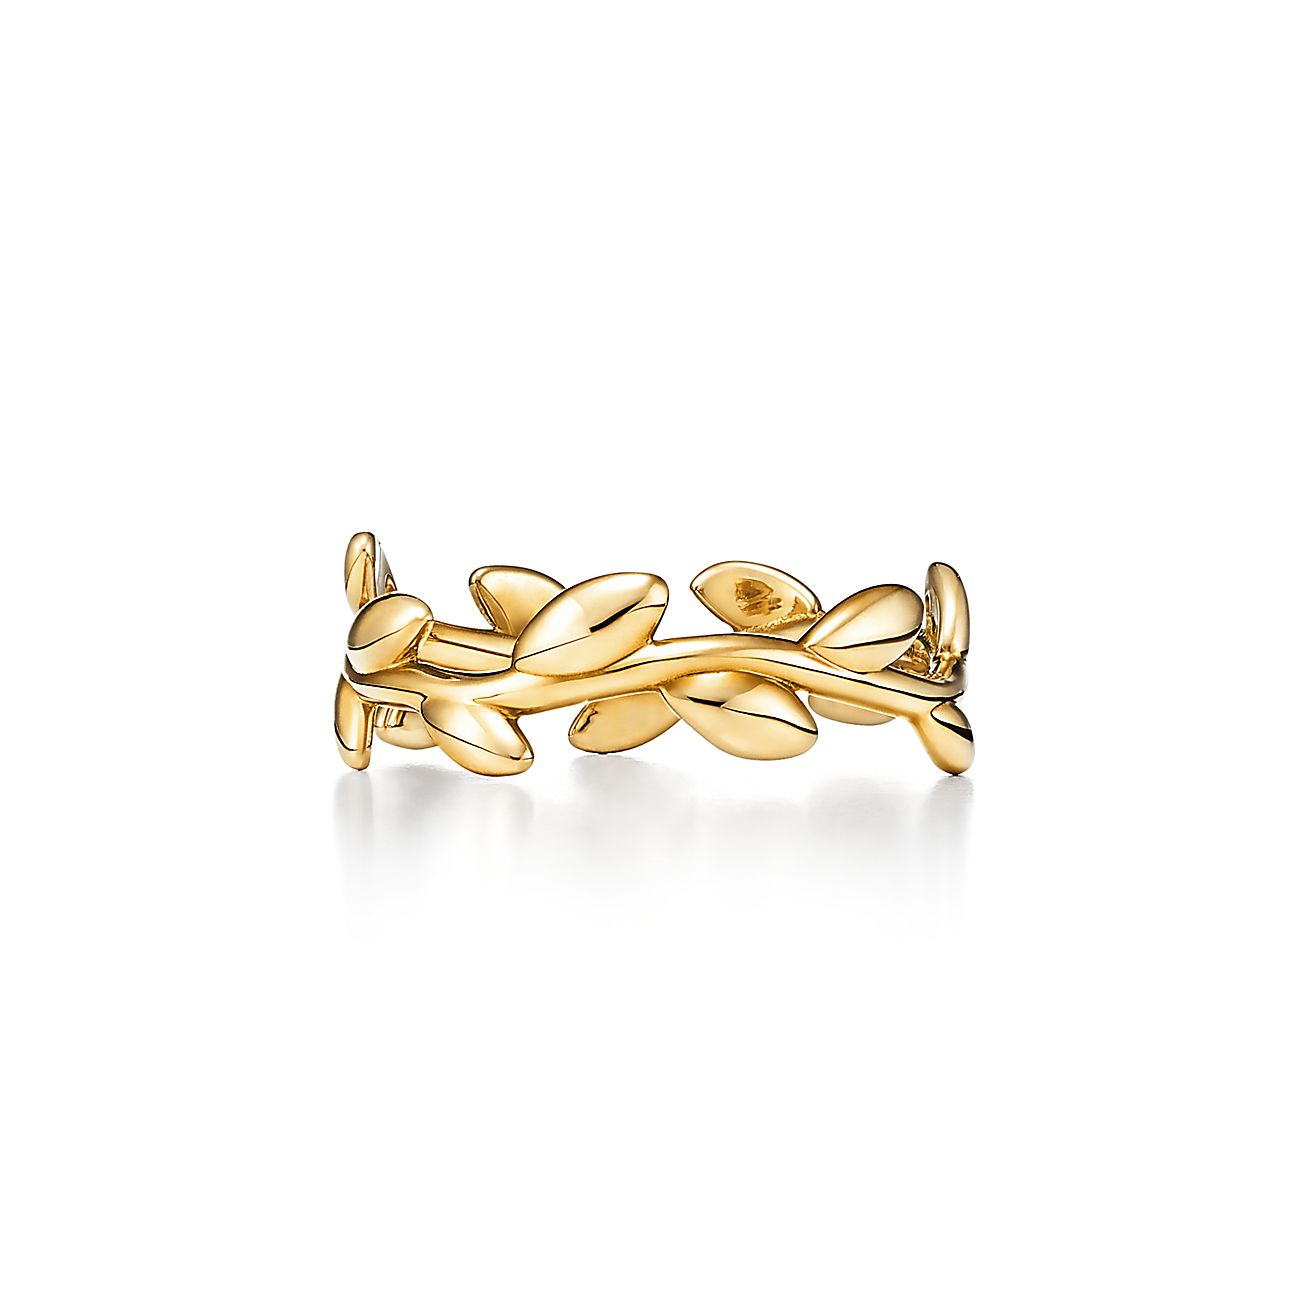 Paloma Picasso Olive Leaf Ring in 18K Gold with A Freshwater Cultured Pearl, Size: 8 1/2